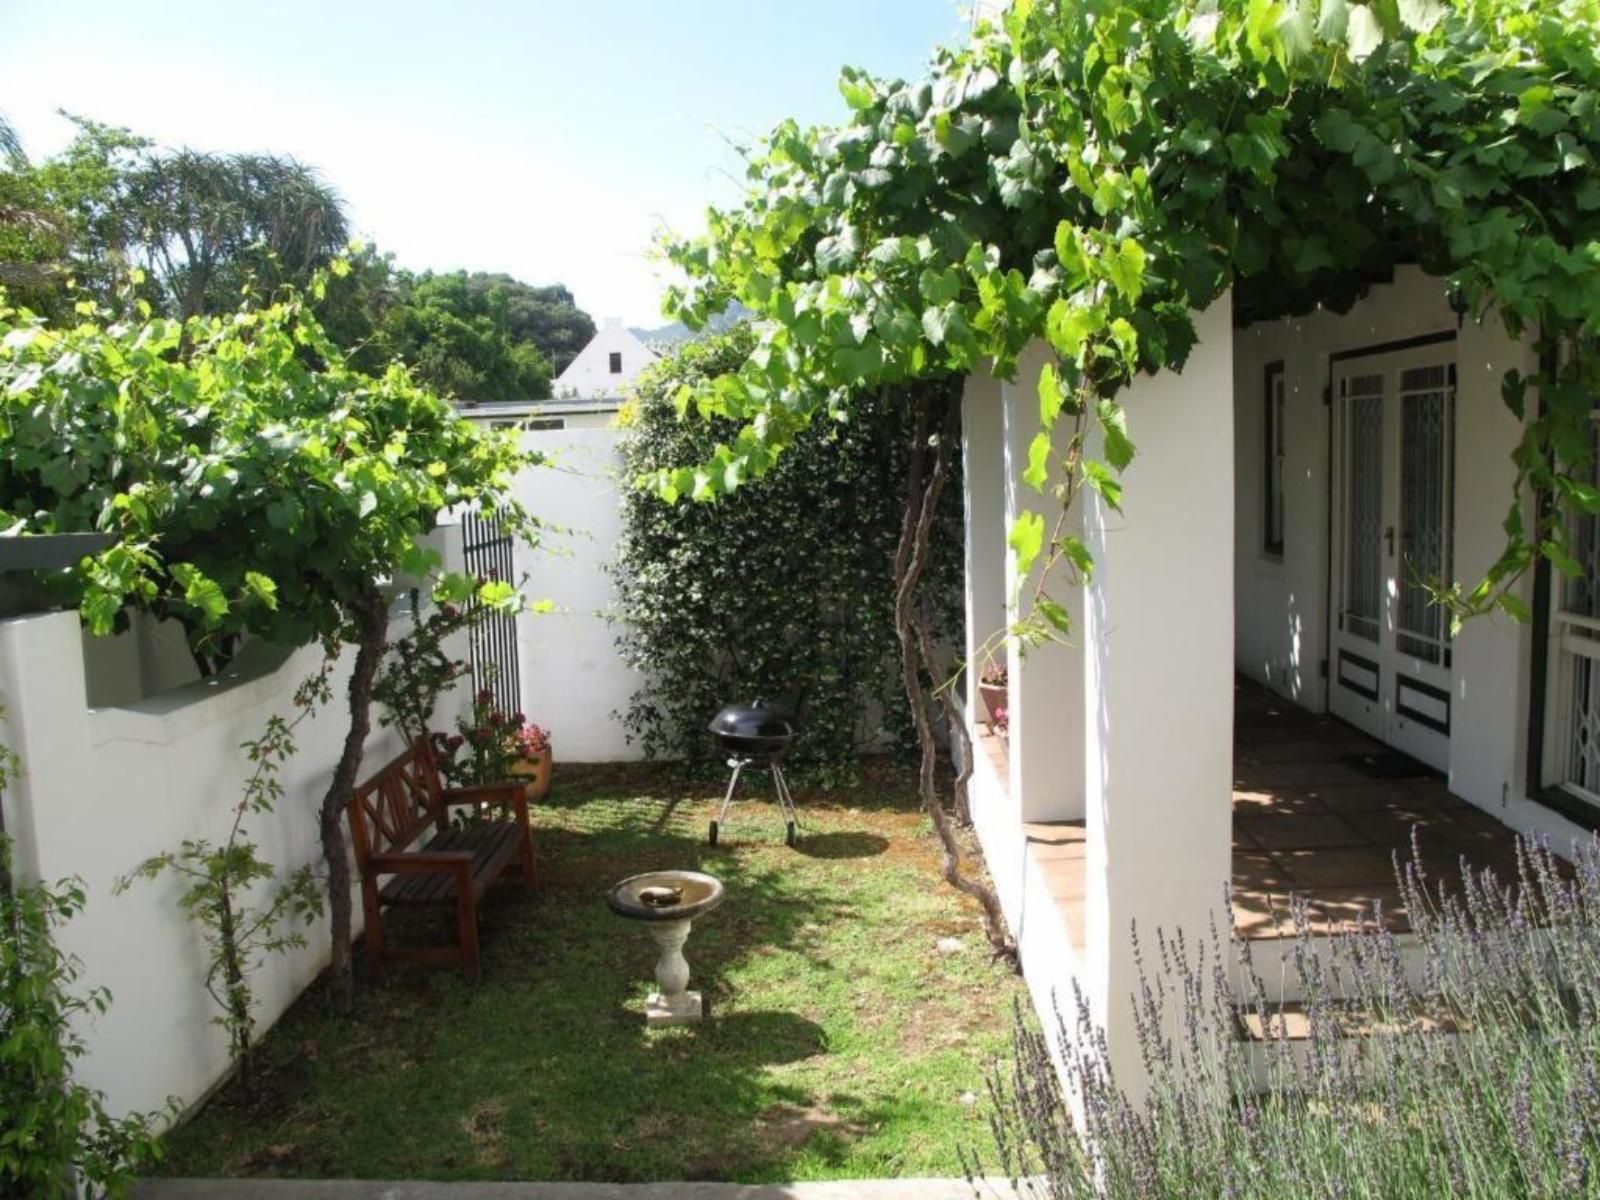 Sunny Lane Franschhoek Western Cape South Africa House, Building, Architecture, Plant, Nature, Garden